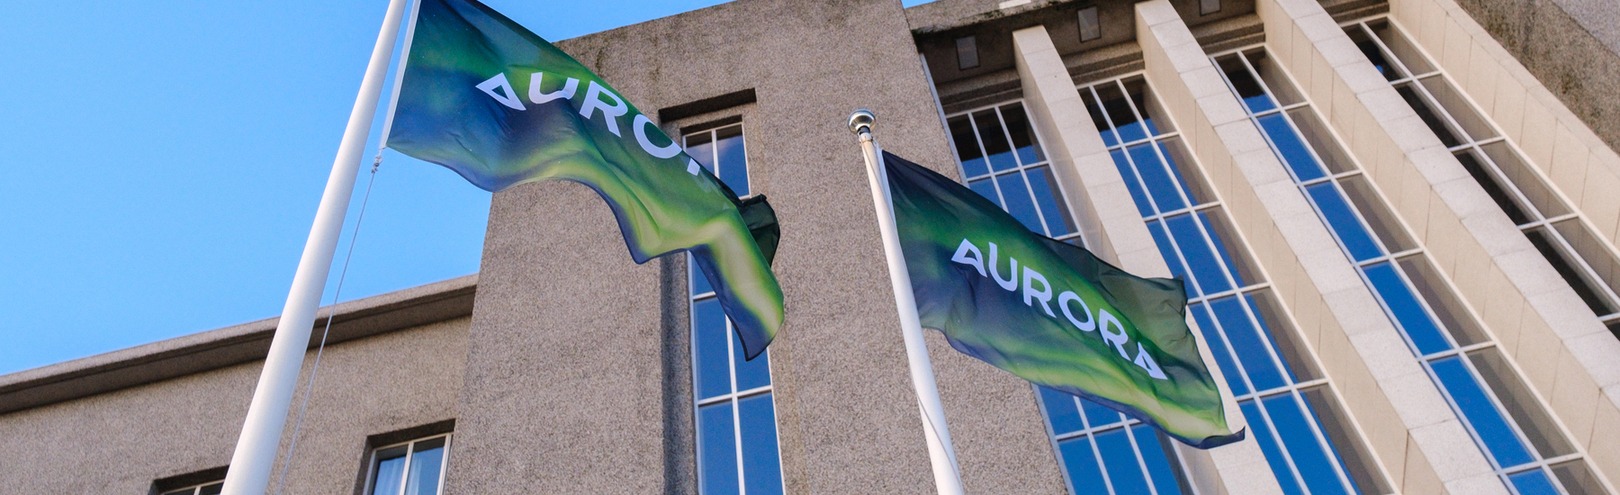 Aurora launched in the name of progress - Available at University of Iceland